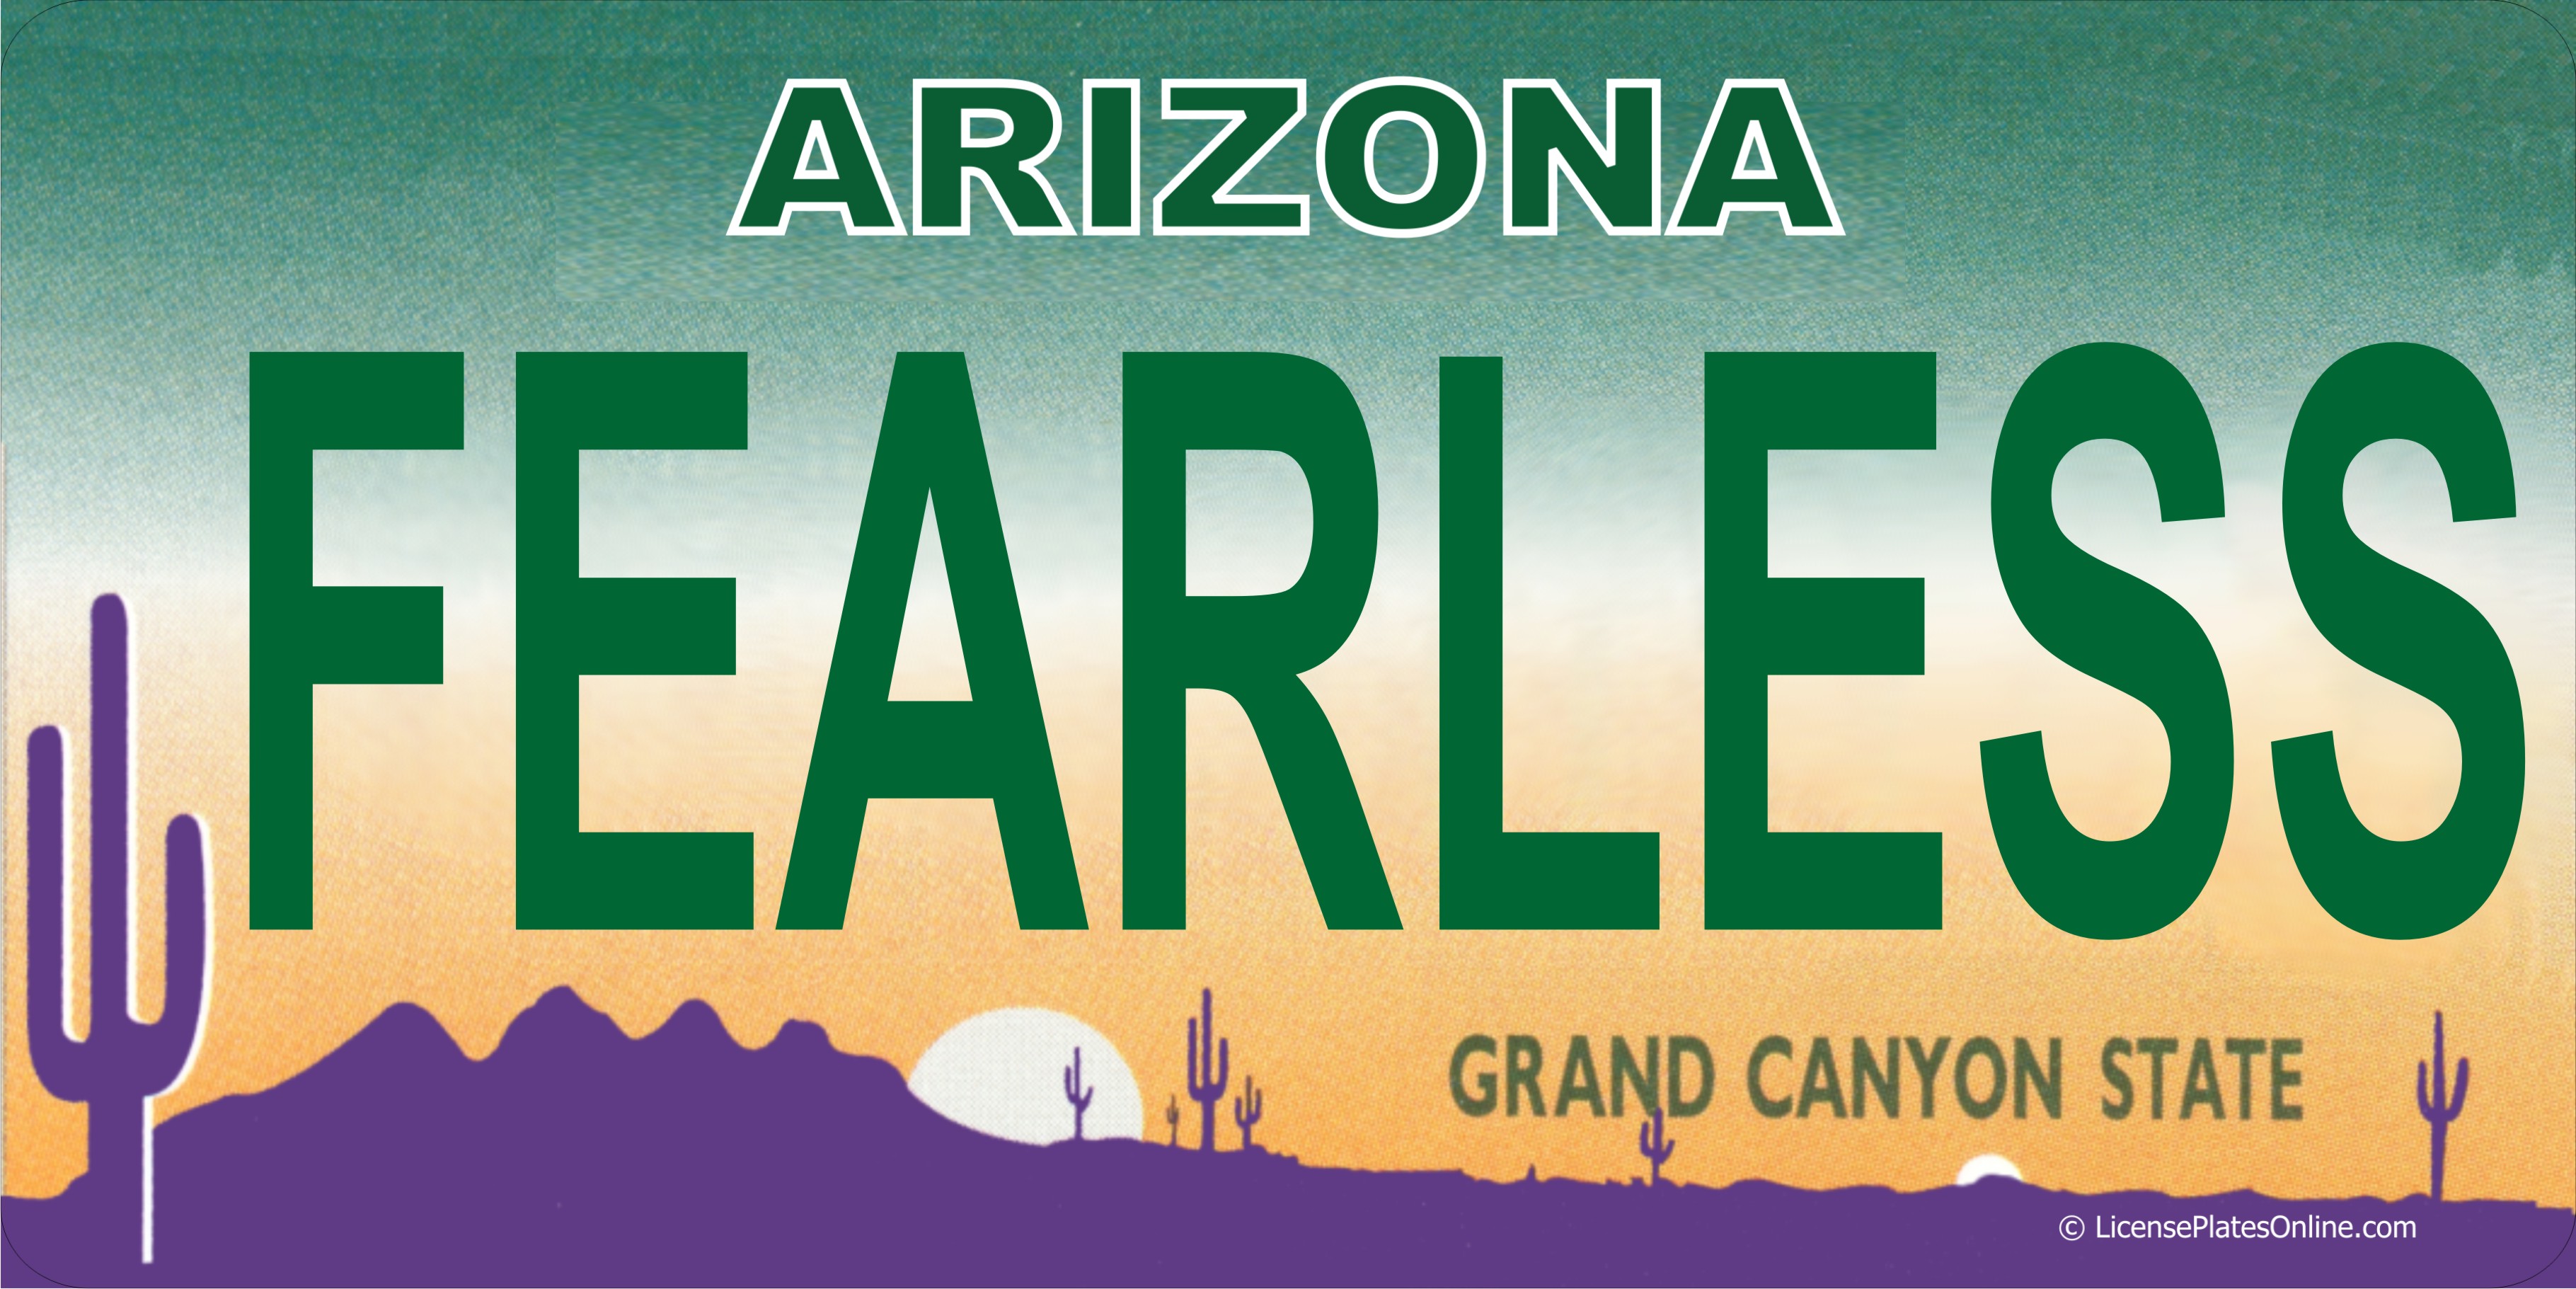 Arizona FEARLESS Photo LICENSE PLATE   Free Personalization on this PLATE